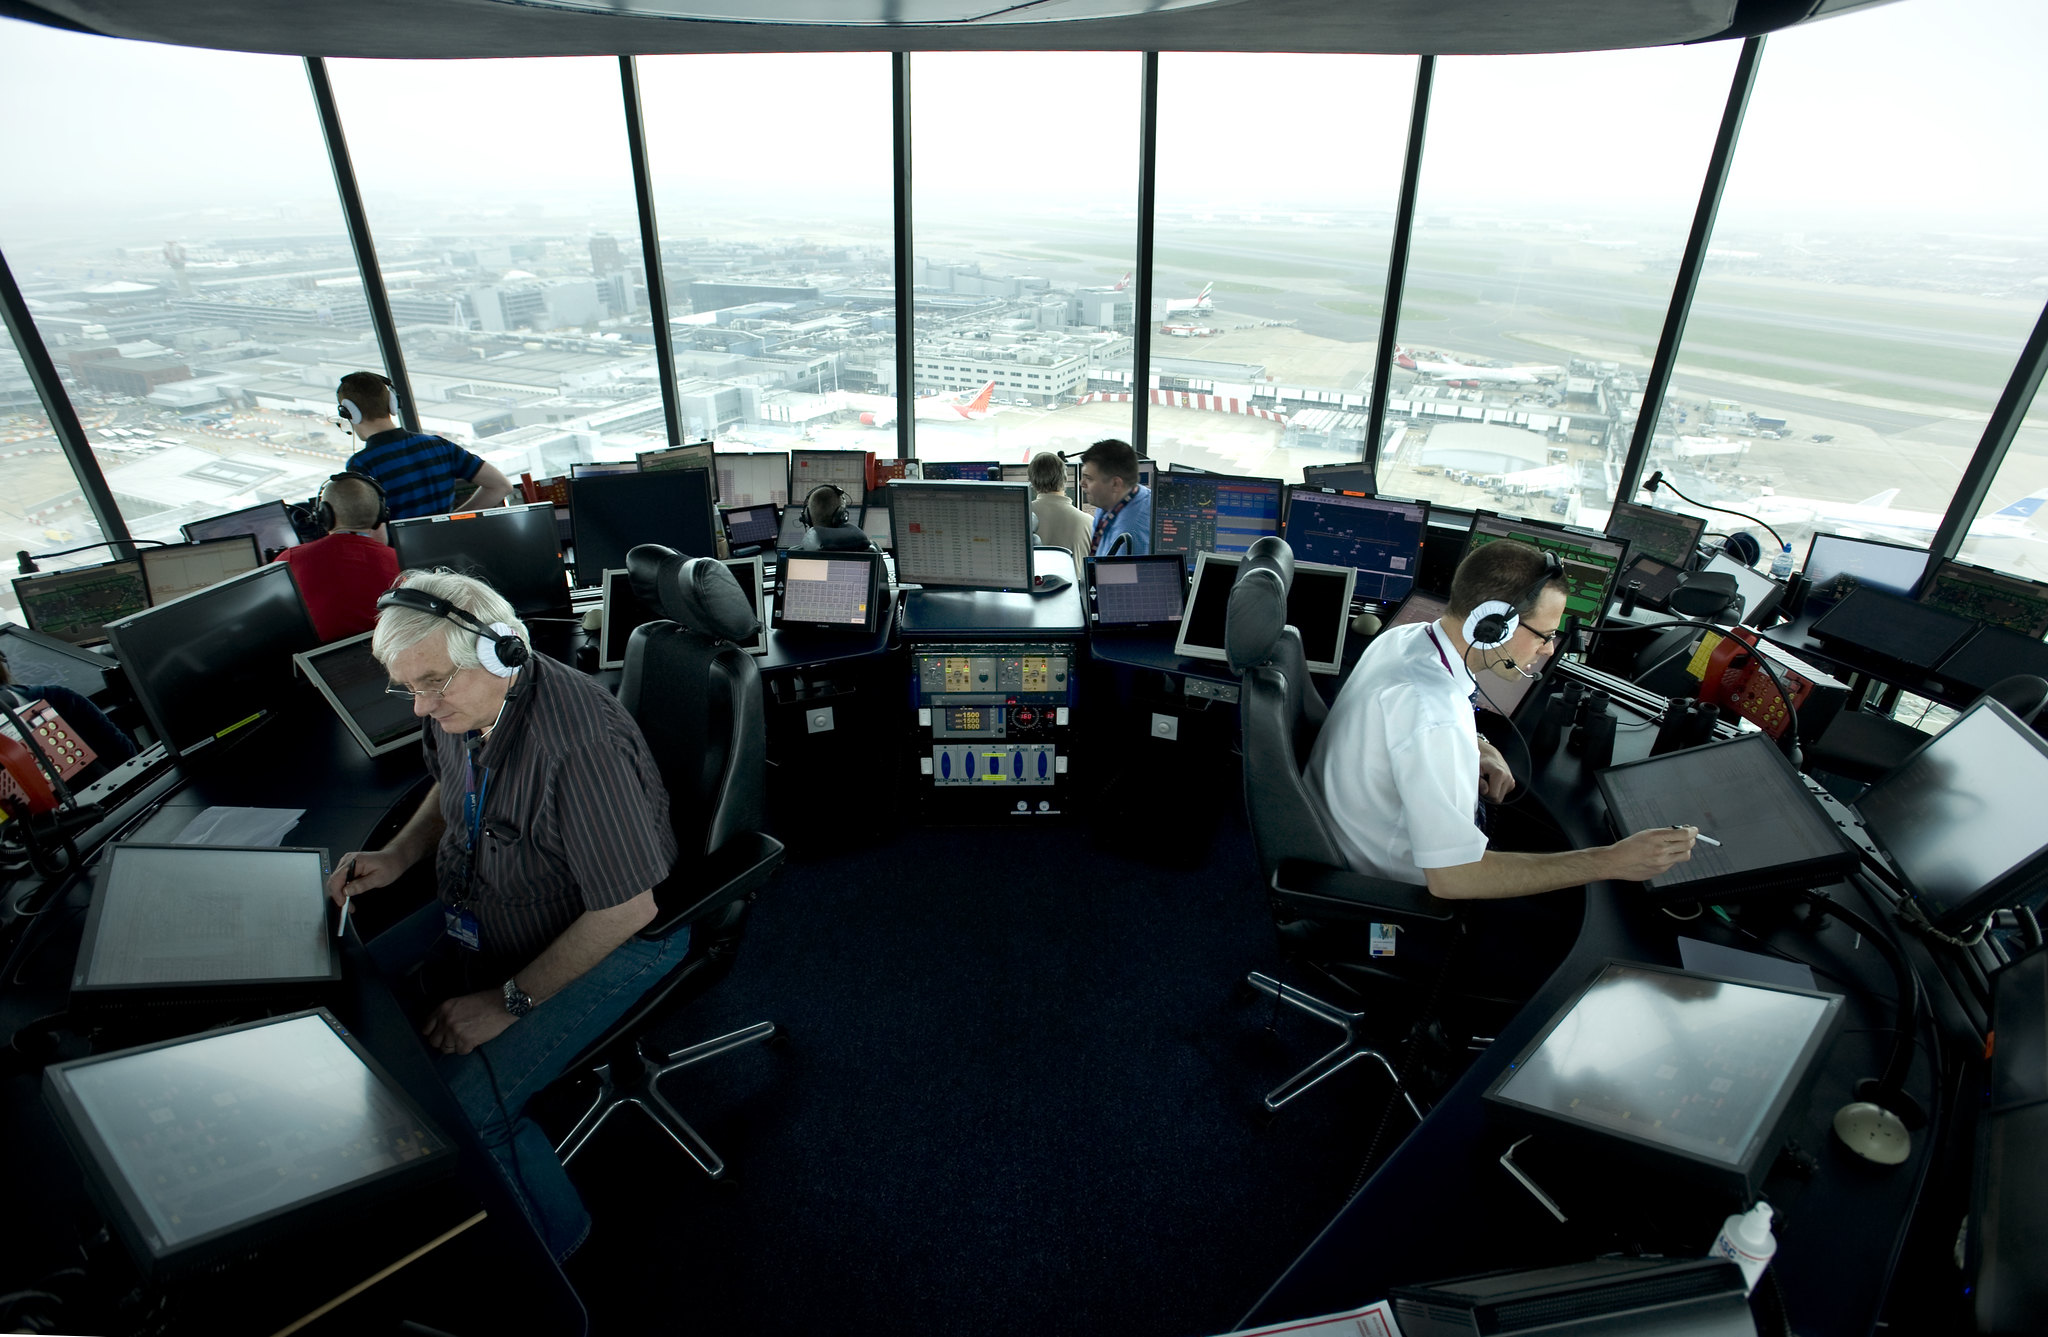 Air traffic controllers sat in control tower at Heathrow Airport in London, UK with airport and planes in the background